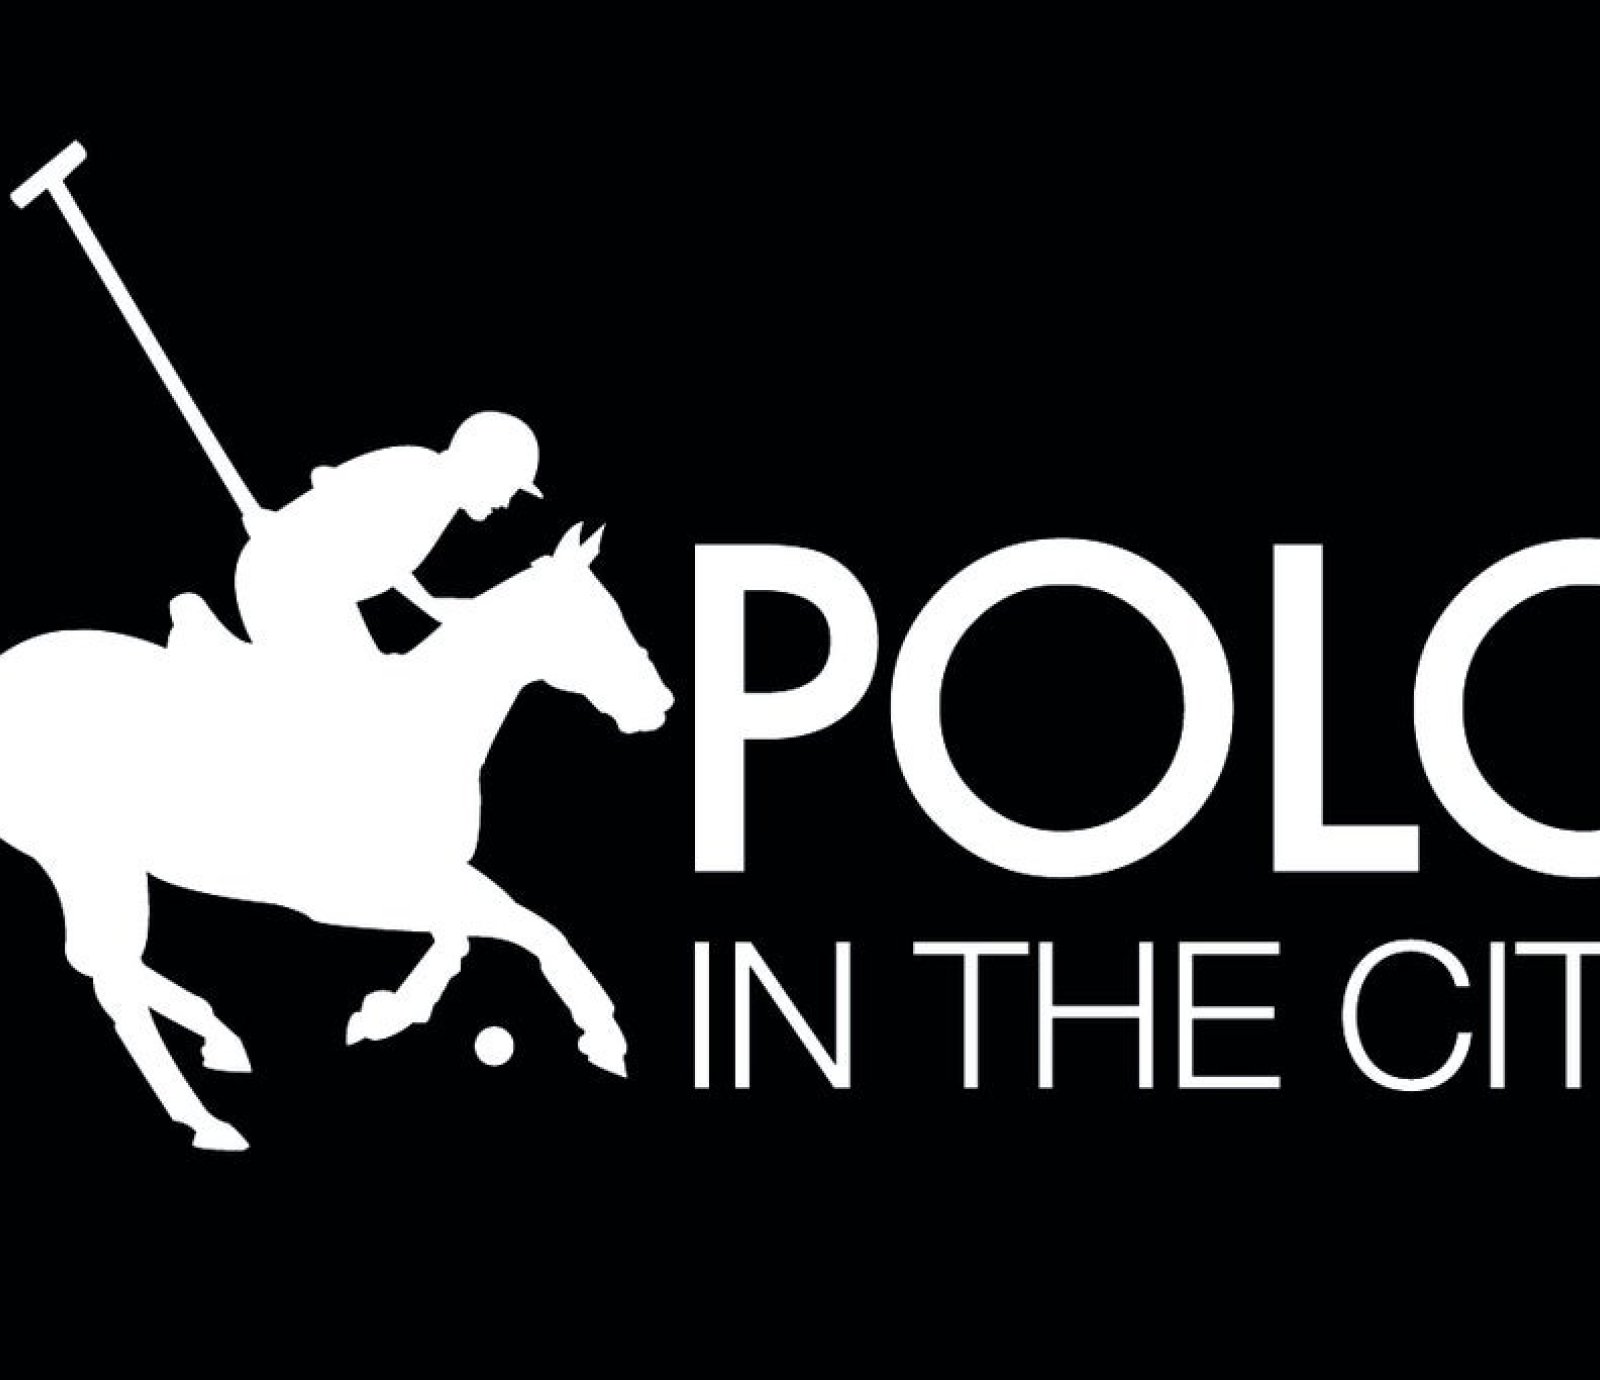 Polo in the City